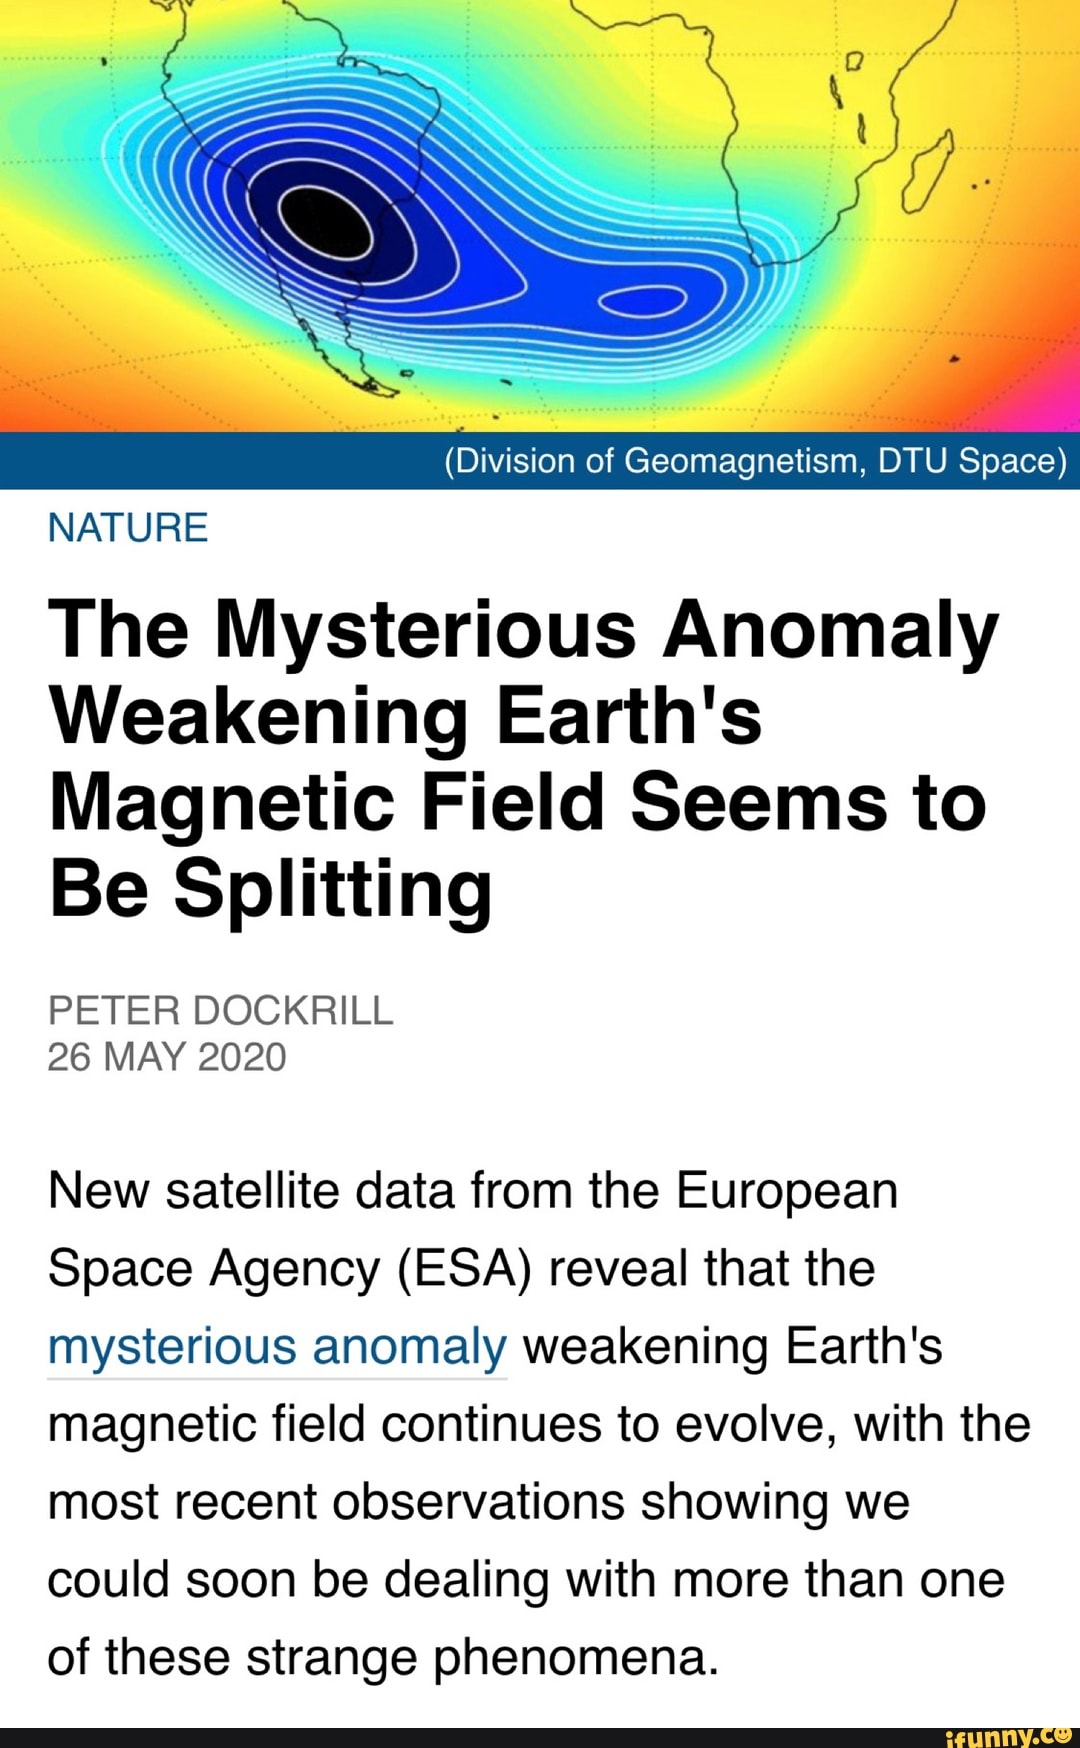 NATURE The Mysterious Anomaly Weakening Earth's Magnetic ...